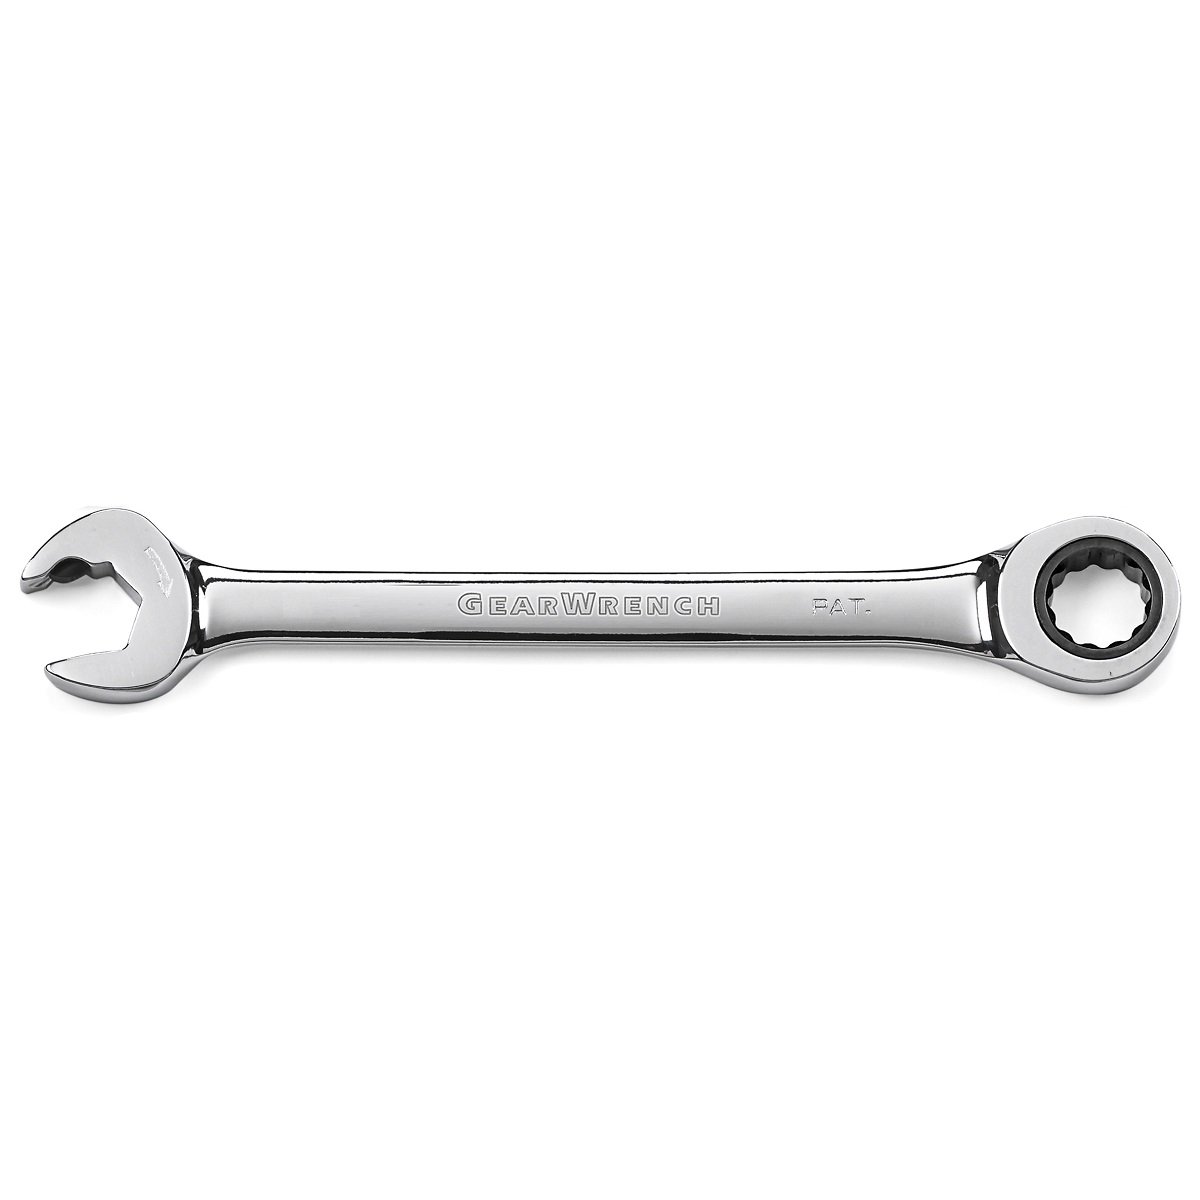 GearWrench Ratcheting Open End Combination Spanner Wrench 12mm 85512D